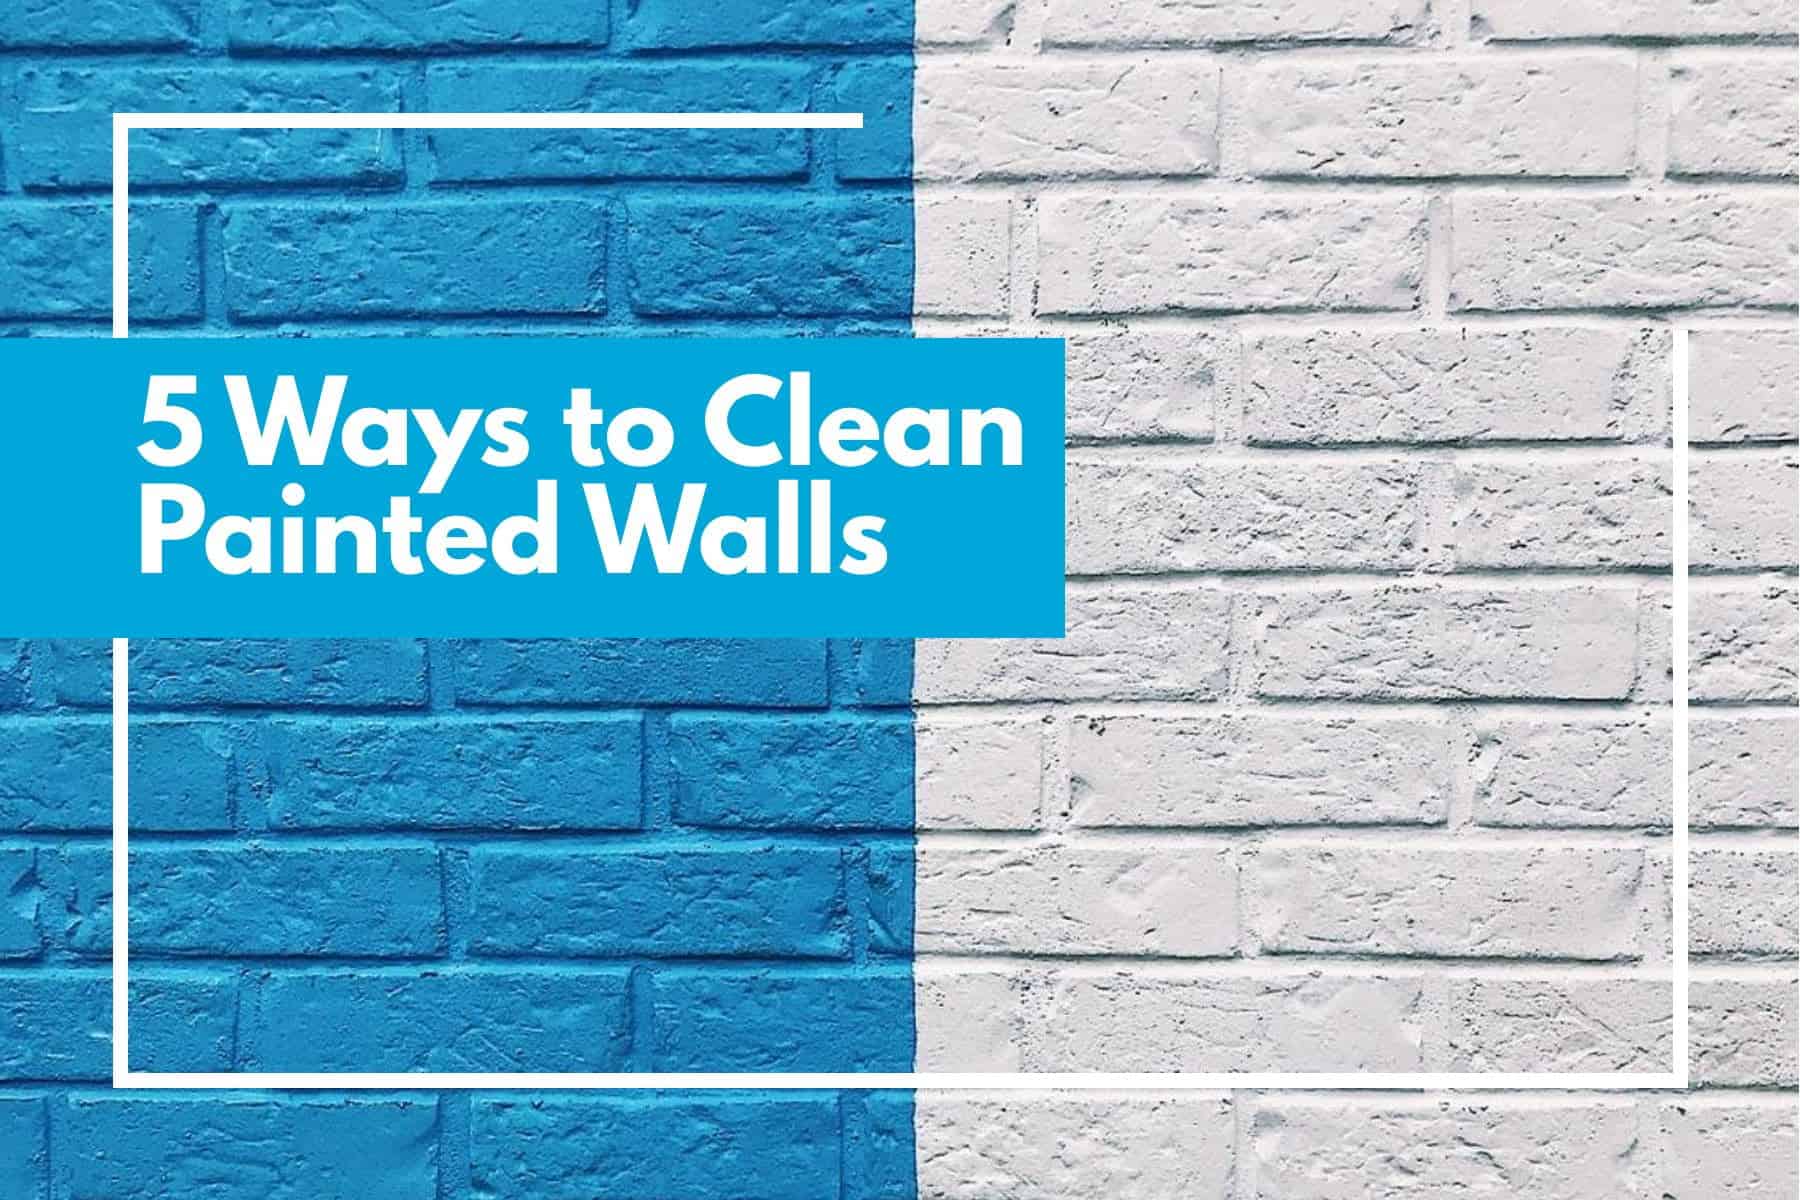 Flat, Semi-Gloss, Glossy: How to Clean Painted Walls Without